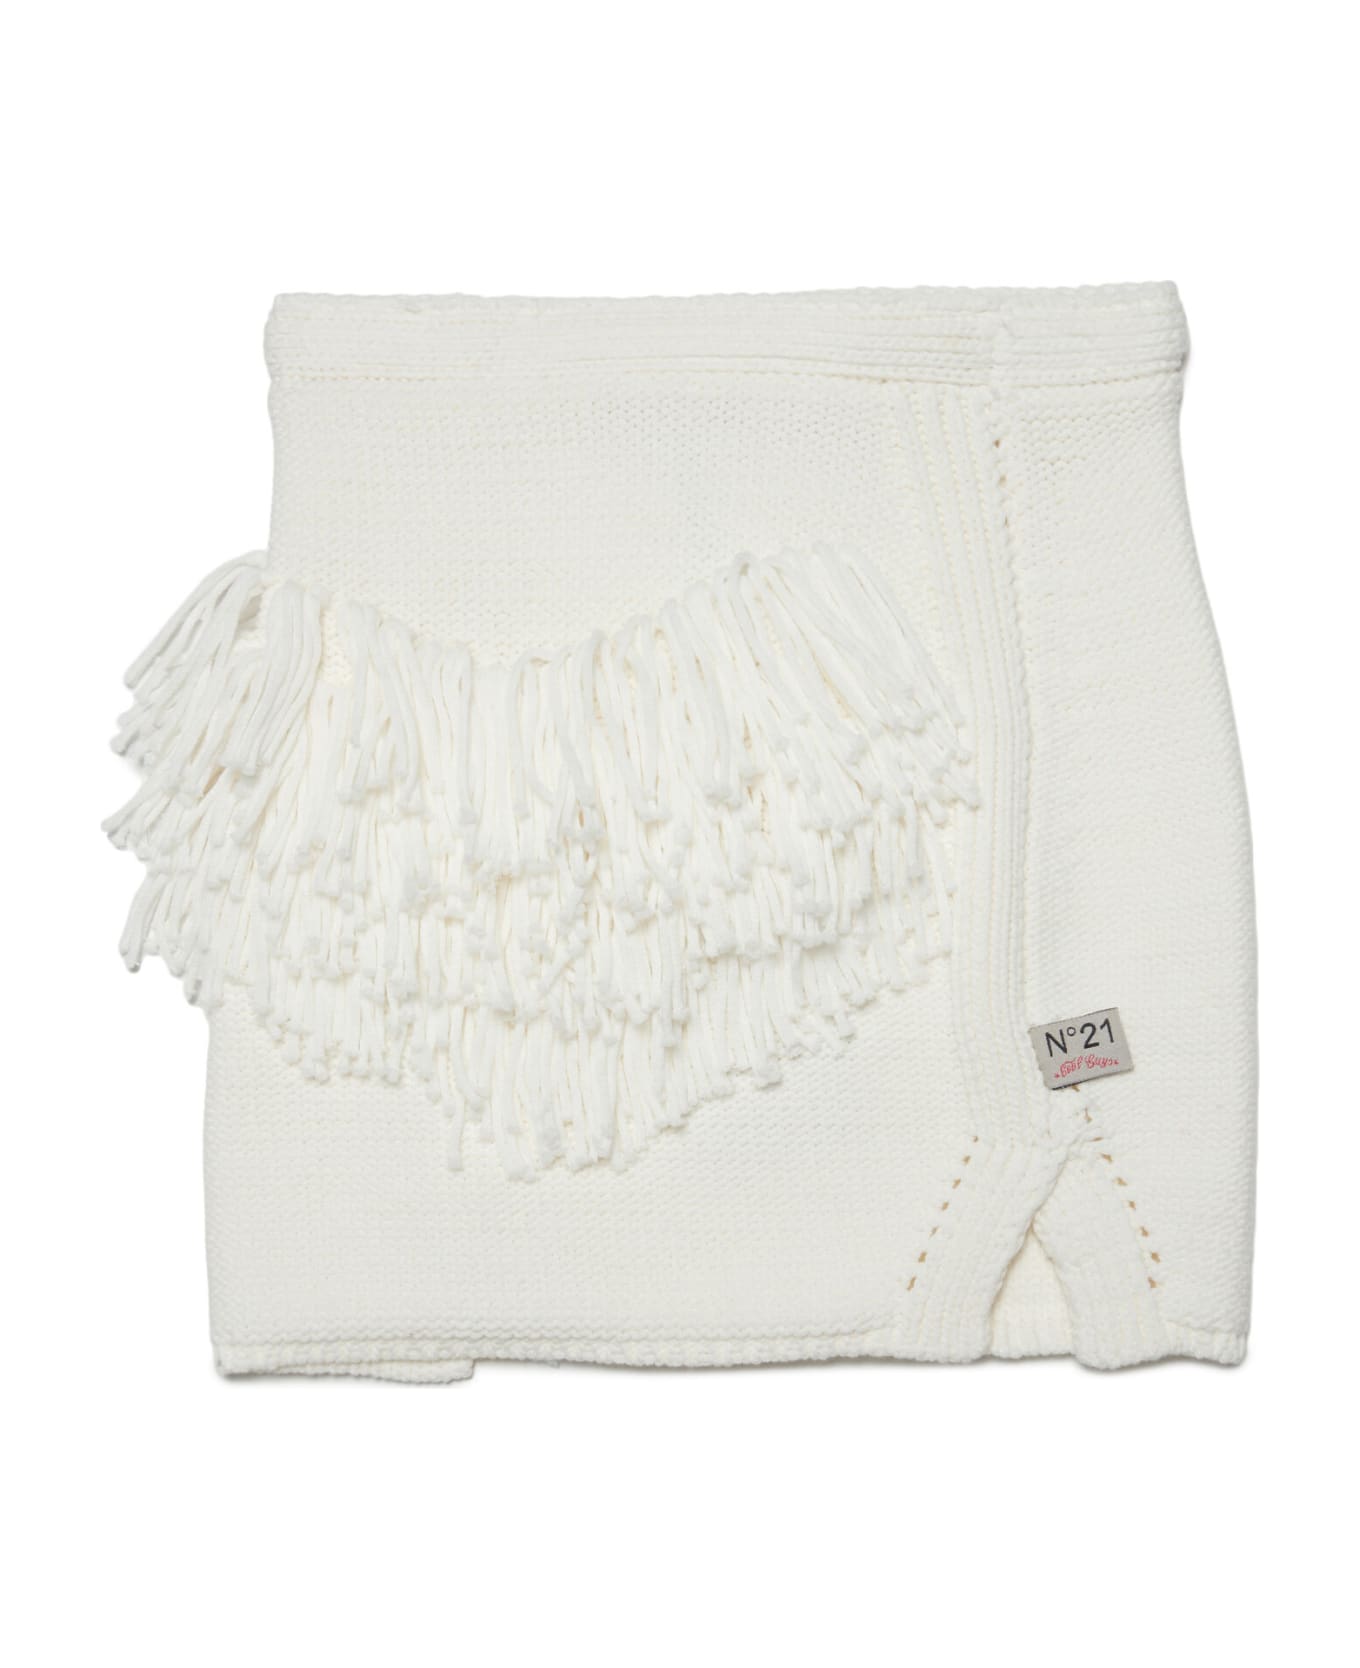 N.21 N21g51f Skirt N°21 White Hand-made Effect Knit Skirt With Applied Fringes - Natural white